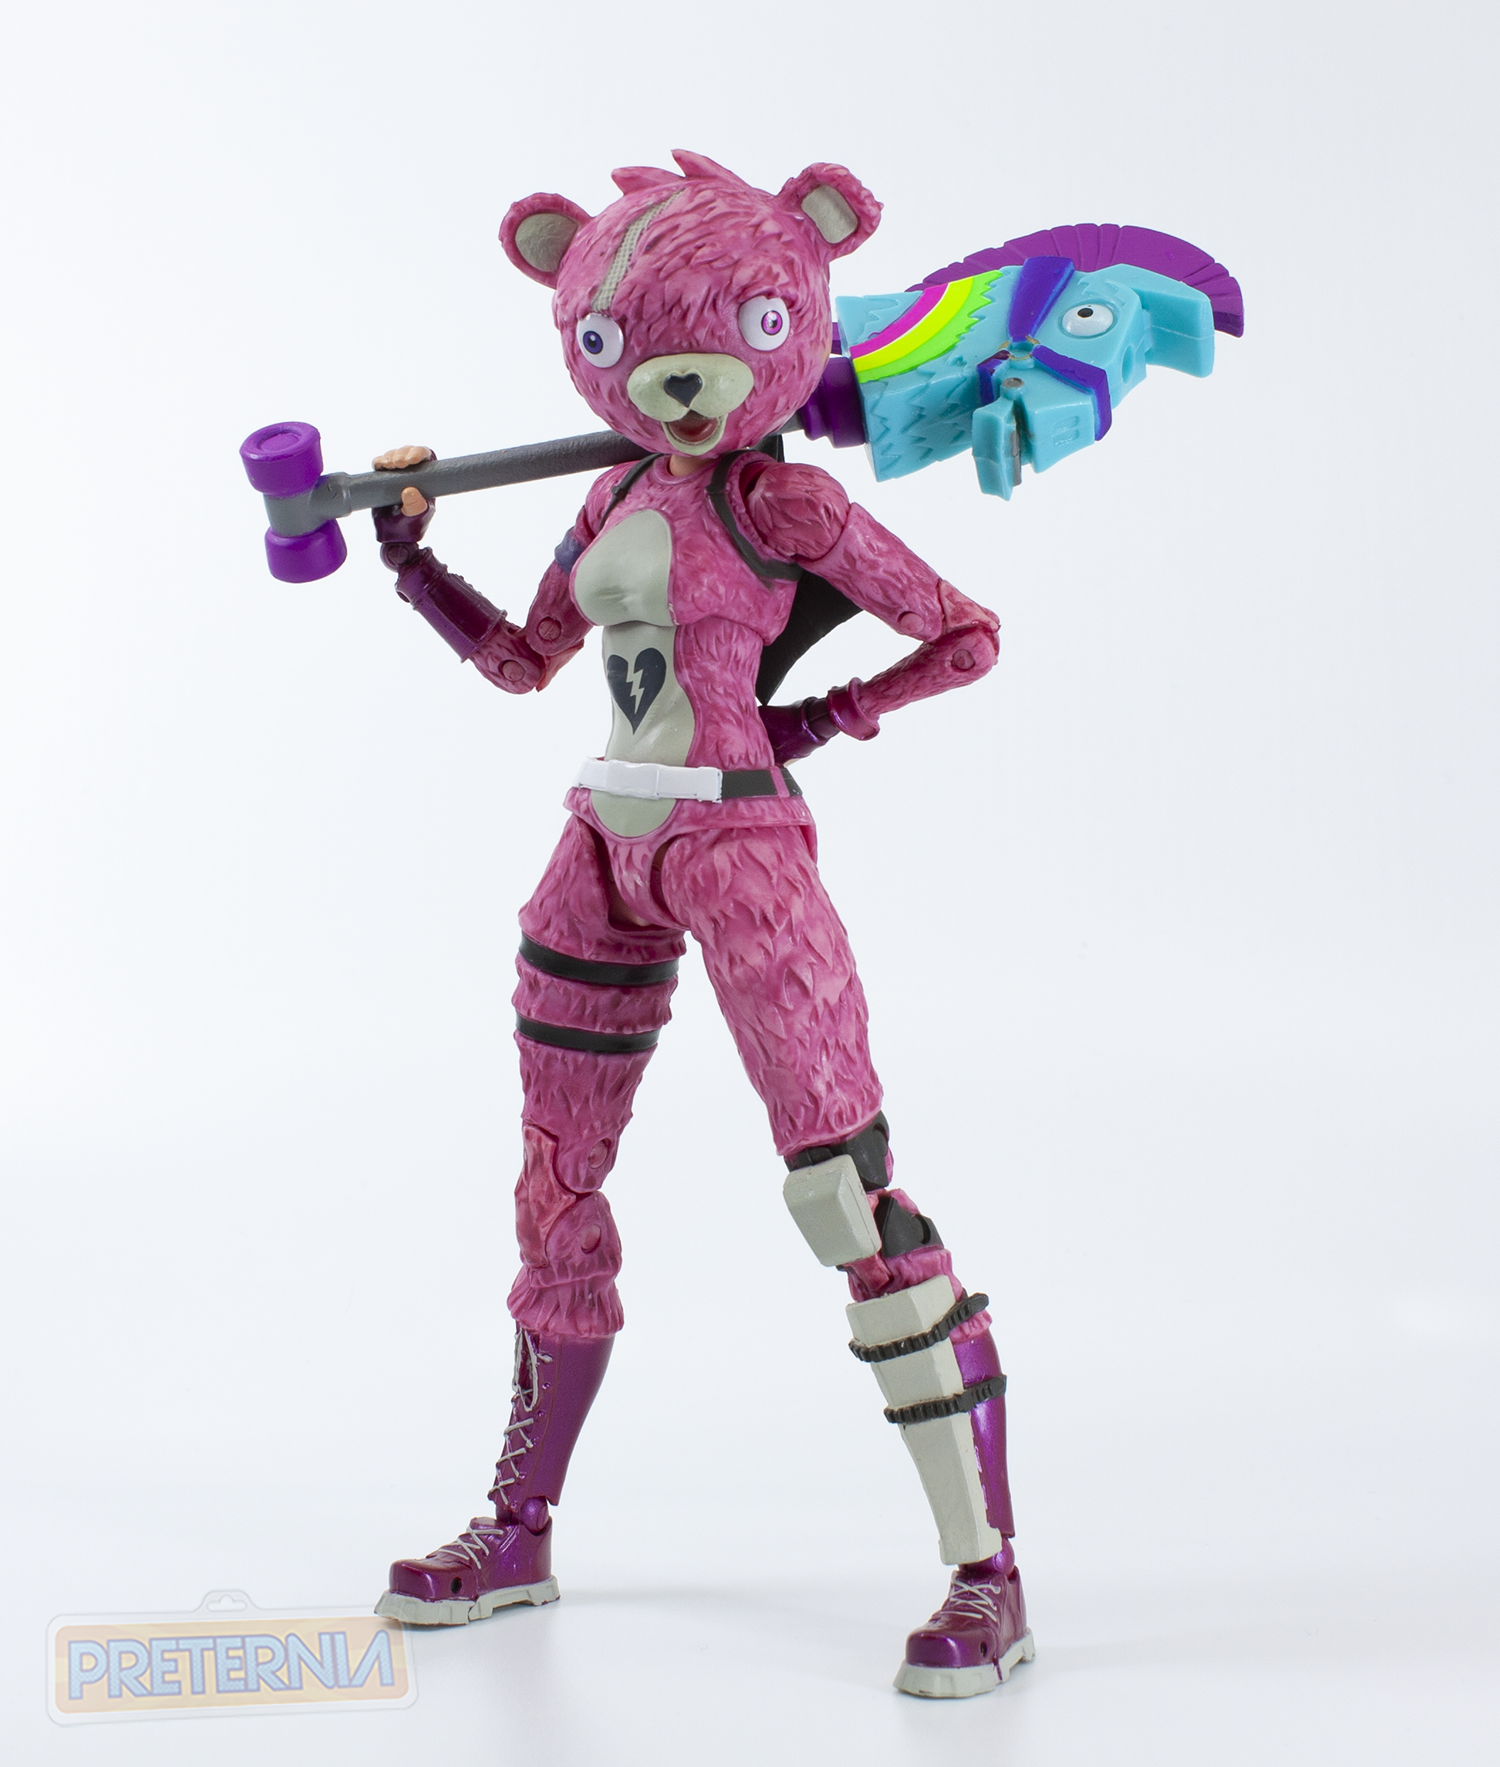 Details about   McFarlane Toys Epic Games FORTNITE CUDDLE TEAM LEADER  7” Action Figure IN STOCK 